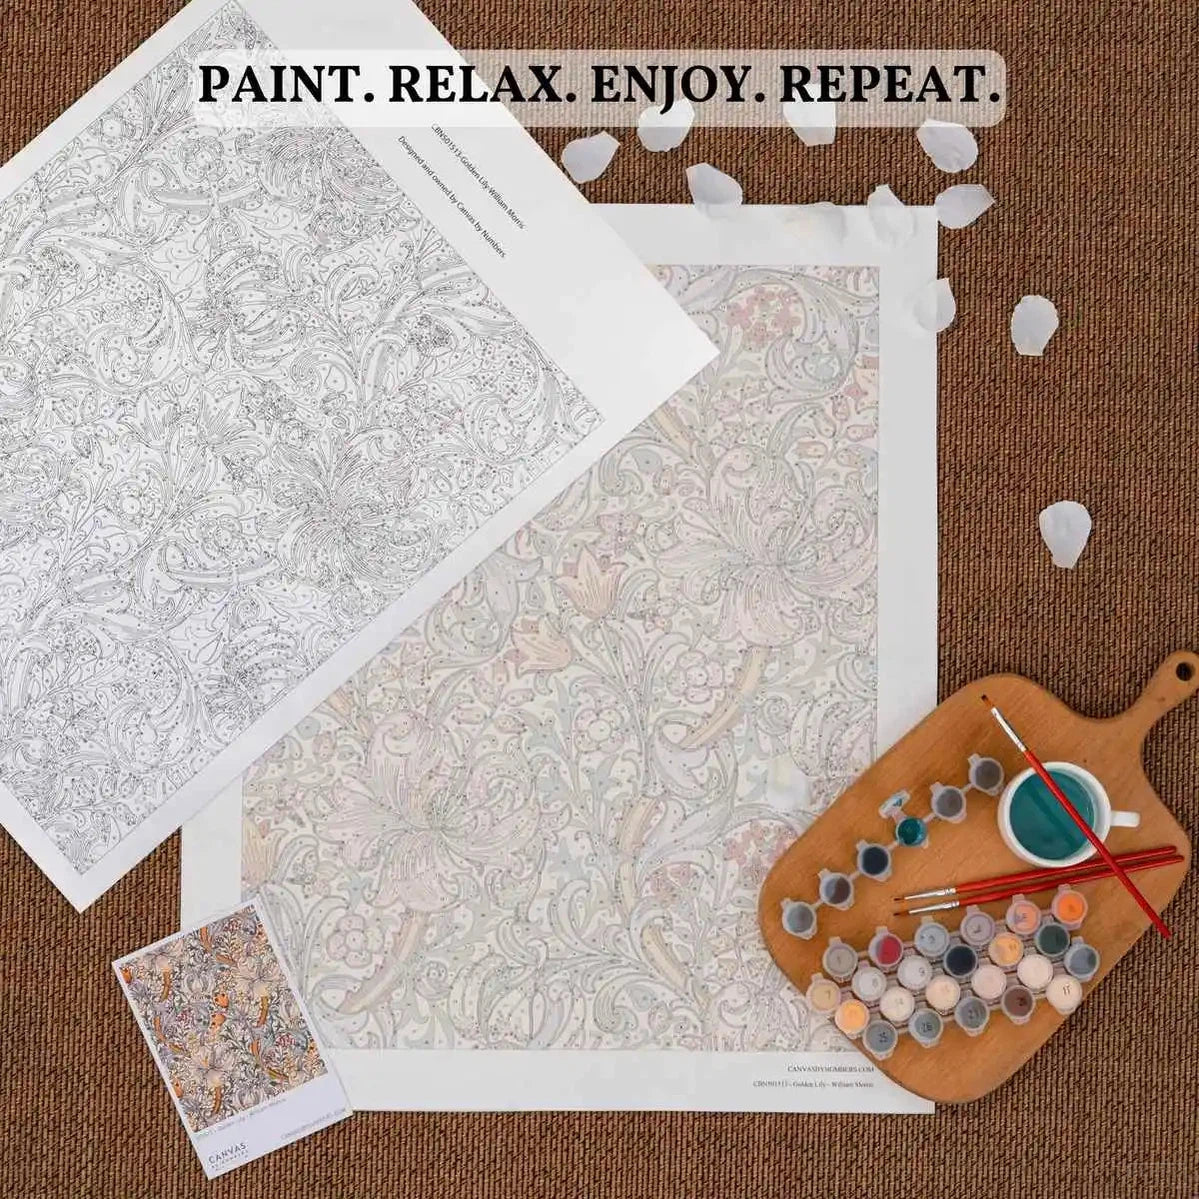 In The Northland - Paint by Numbers-Canadian painter Tom Thomson created this beautiful forest scene so Canvas by Numbers can bring it to you! Enjoy this exclusive paint by numbers today!-Canvas by Numbers